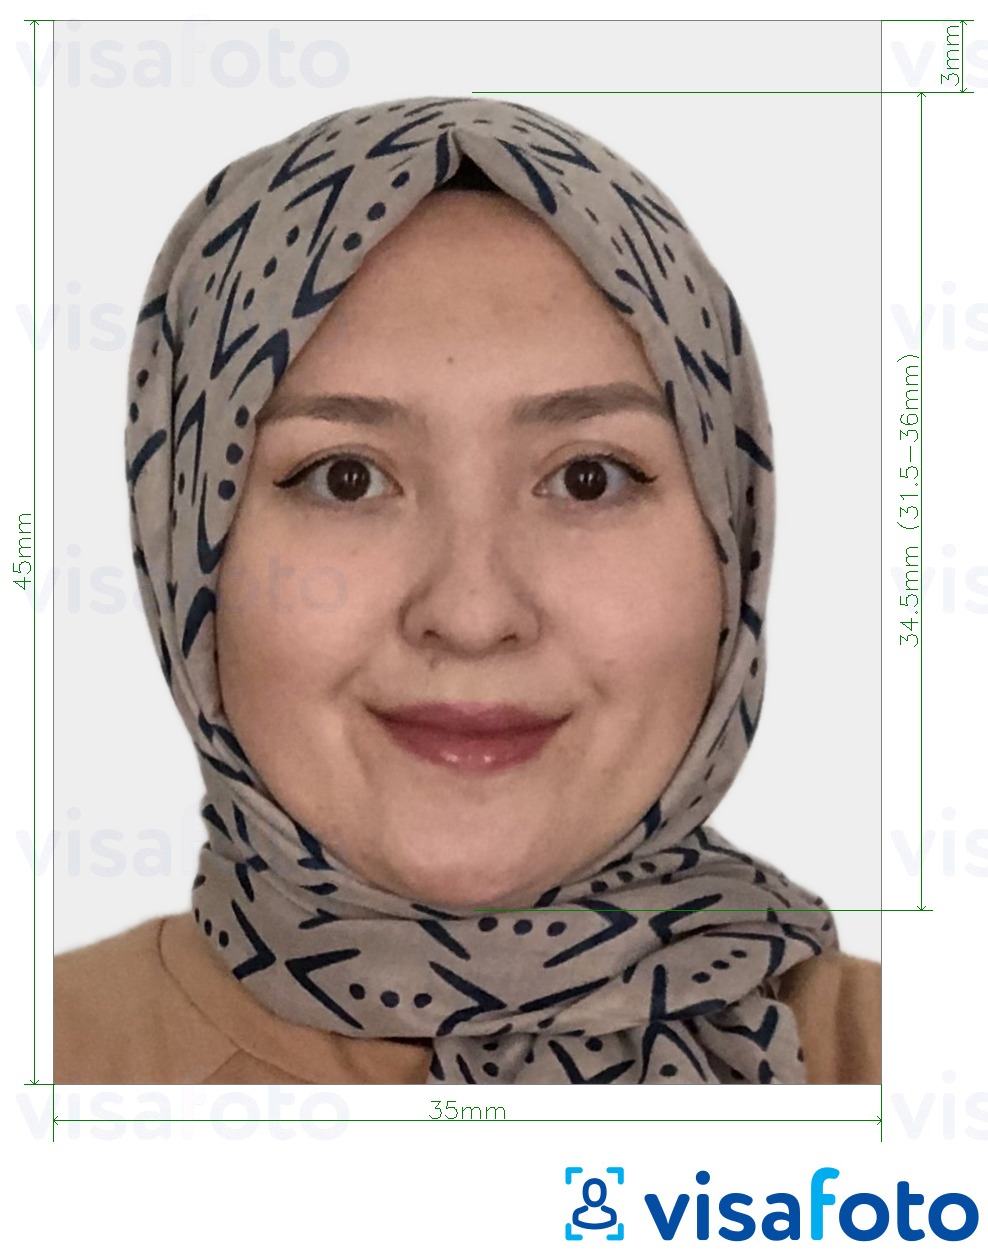 Example of photo for Kyrgyzstan visa 35x45 mm (3.5x4.5 cm) with exact size specification